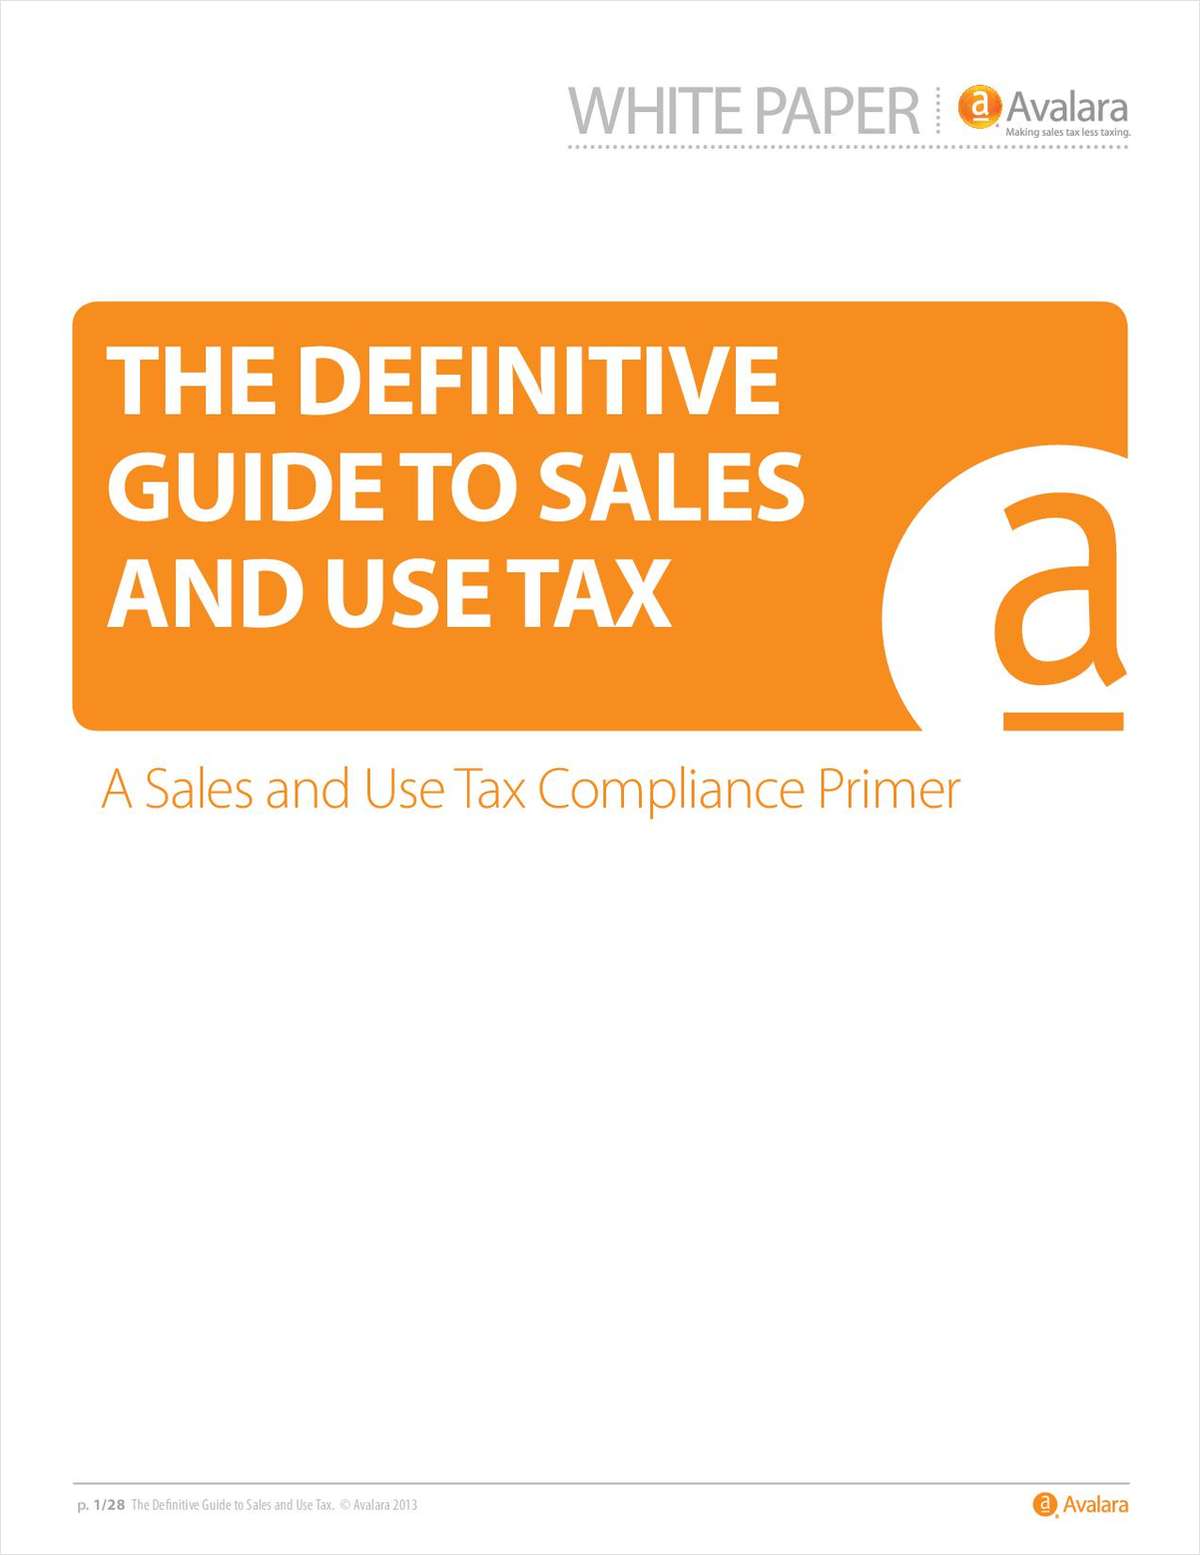 The Definitive Guide to Sales & Use Tax